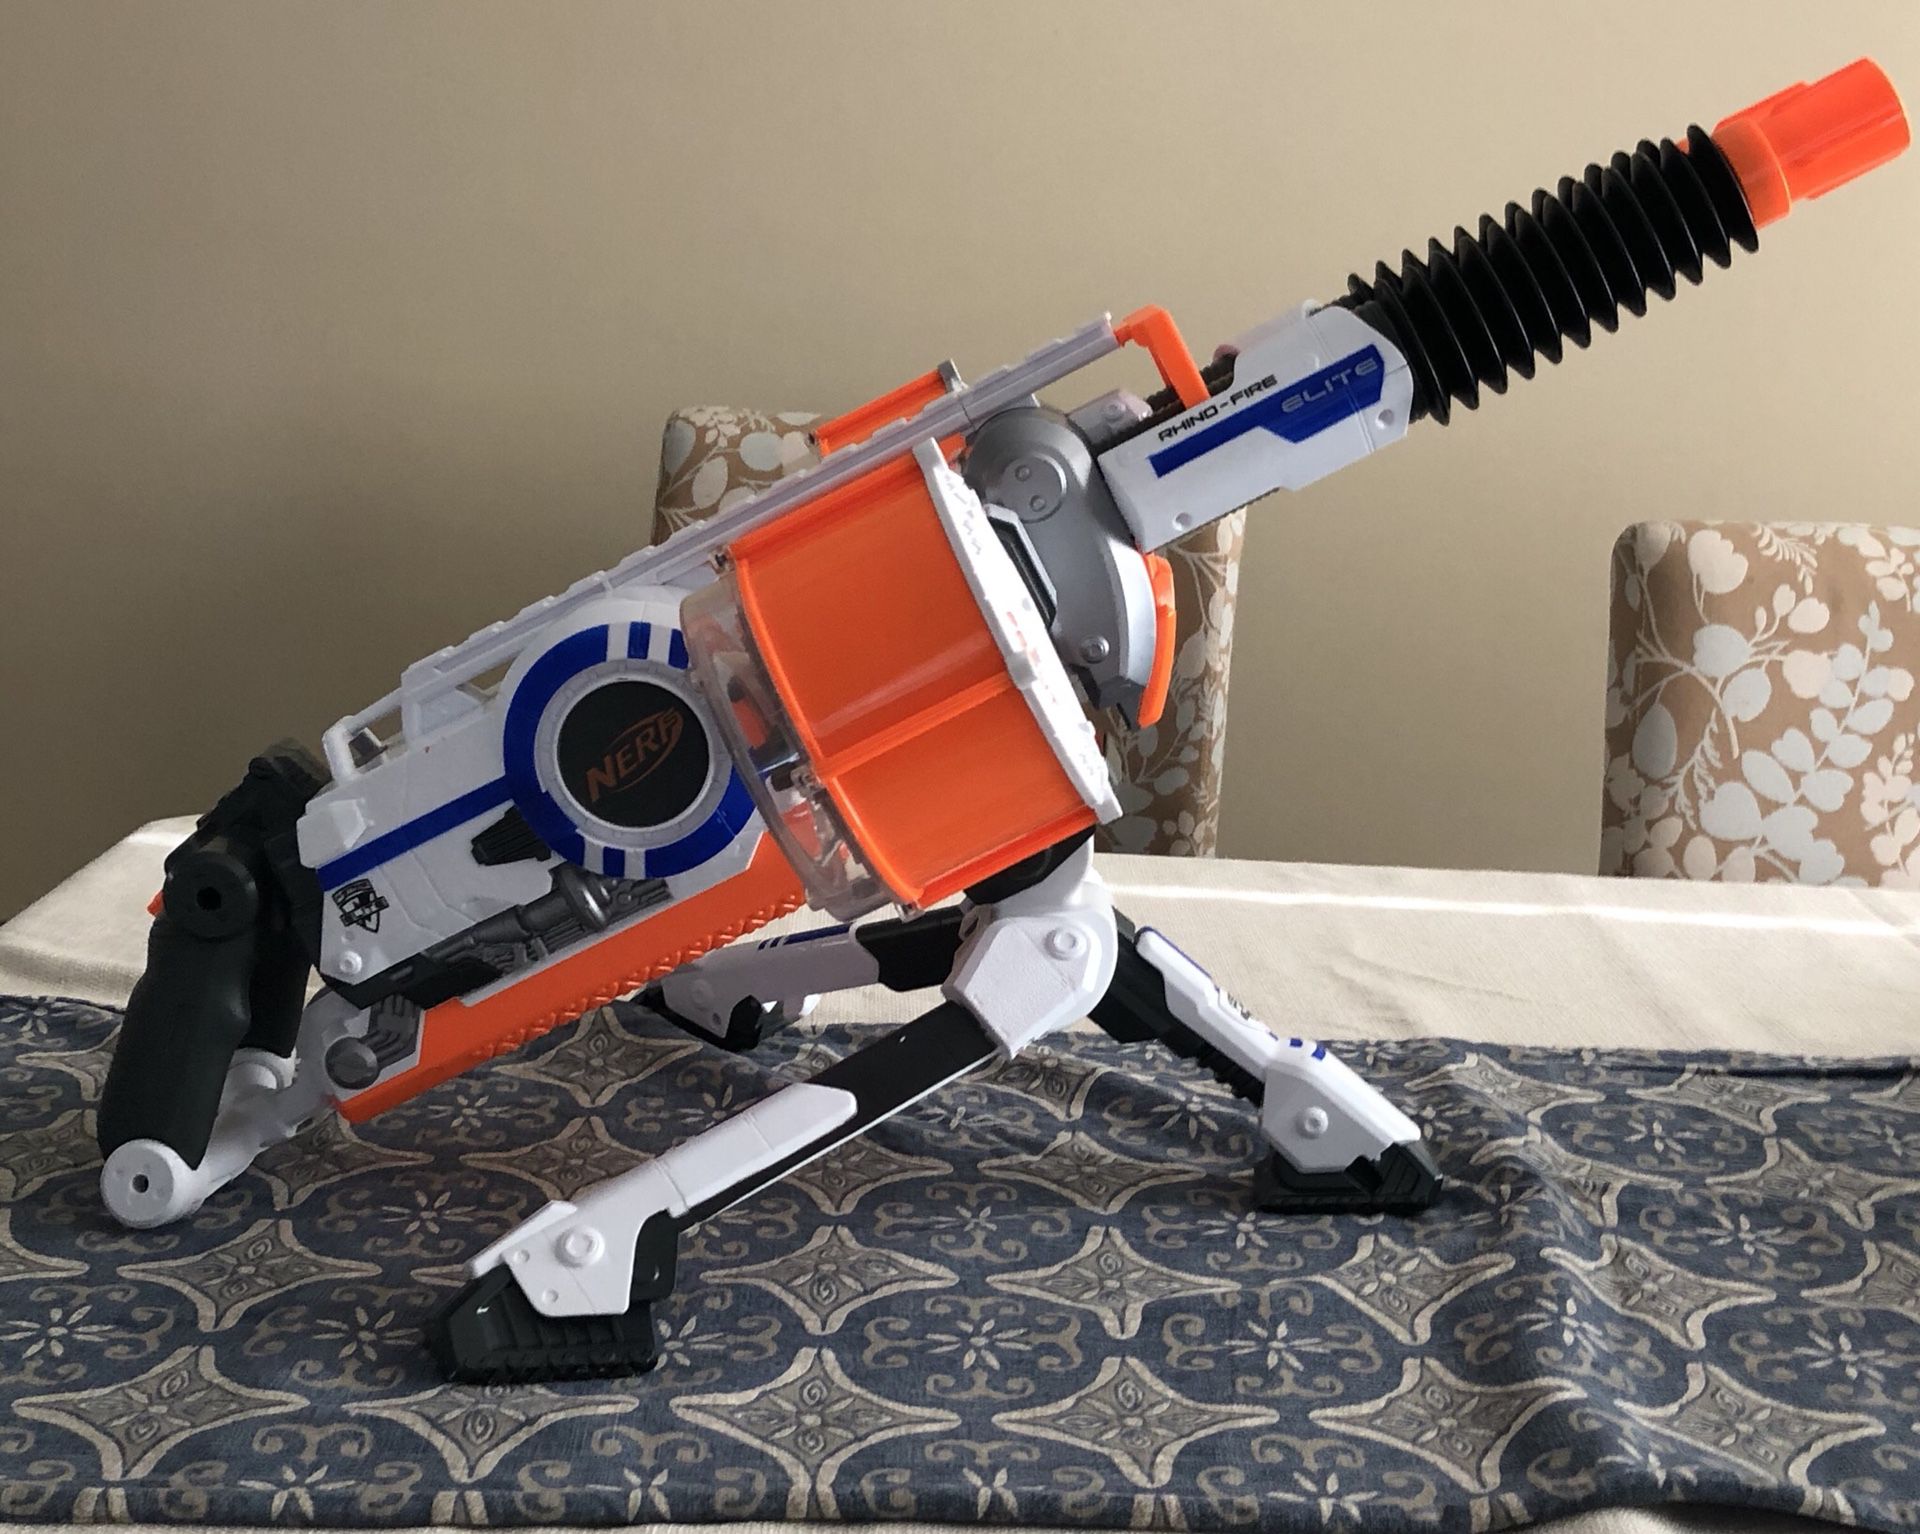 NERF Rhino-Fire Blaster for Sale in Hampshire, - OfferUp